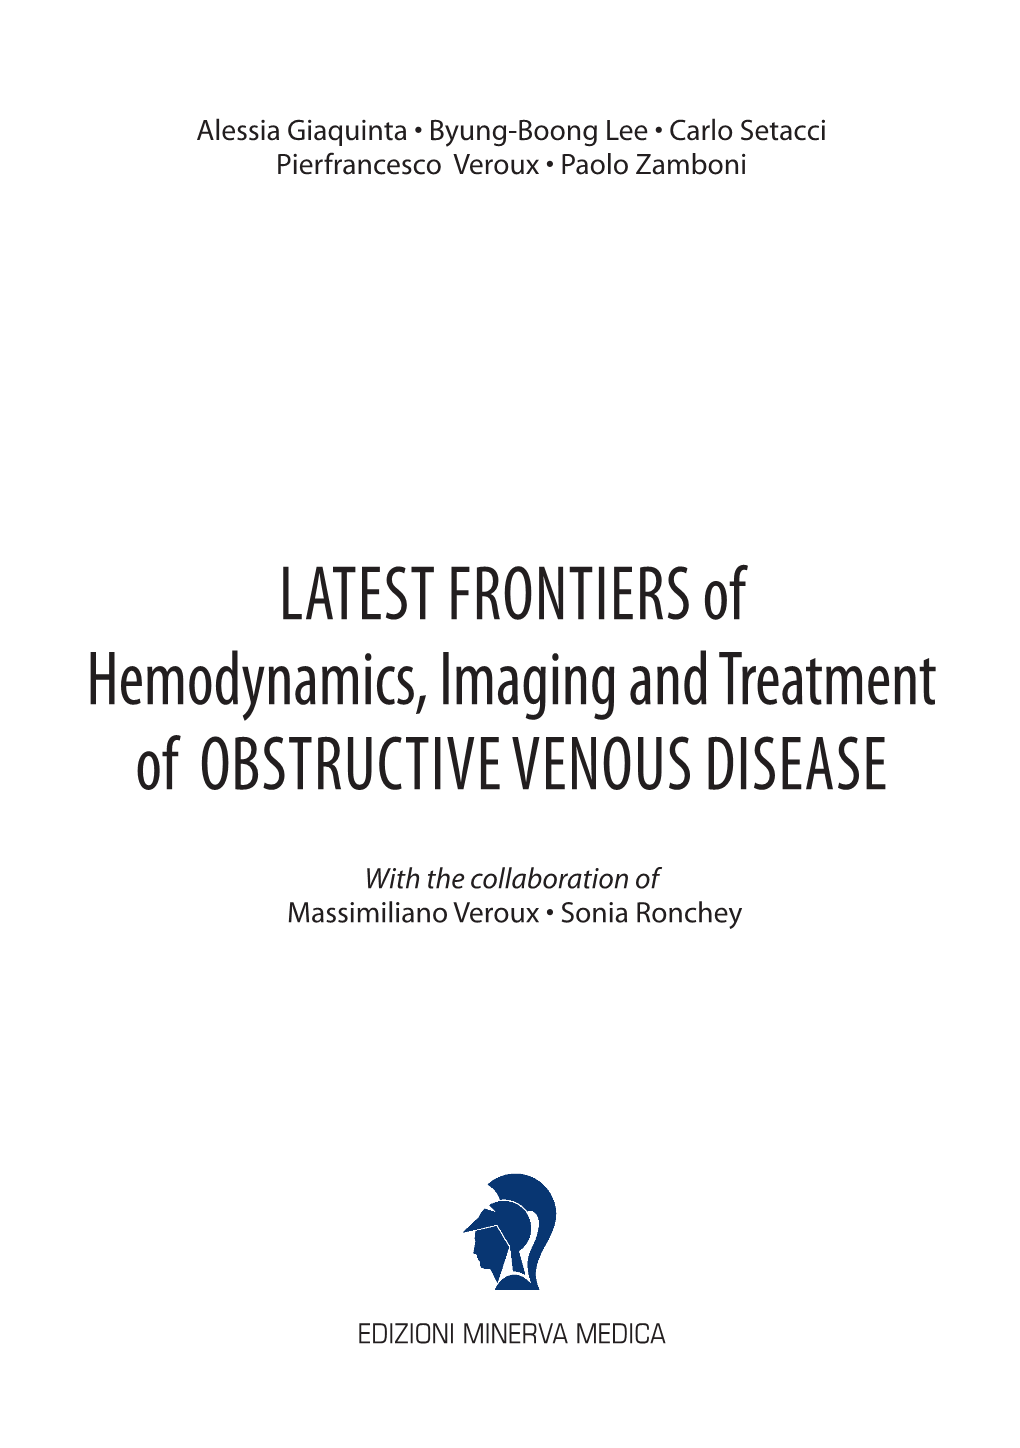 LATEST FRONTIERS of Hemodynamics, Imaging and Treatment of OBSTRUCTIVE VENOUS DISEASE